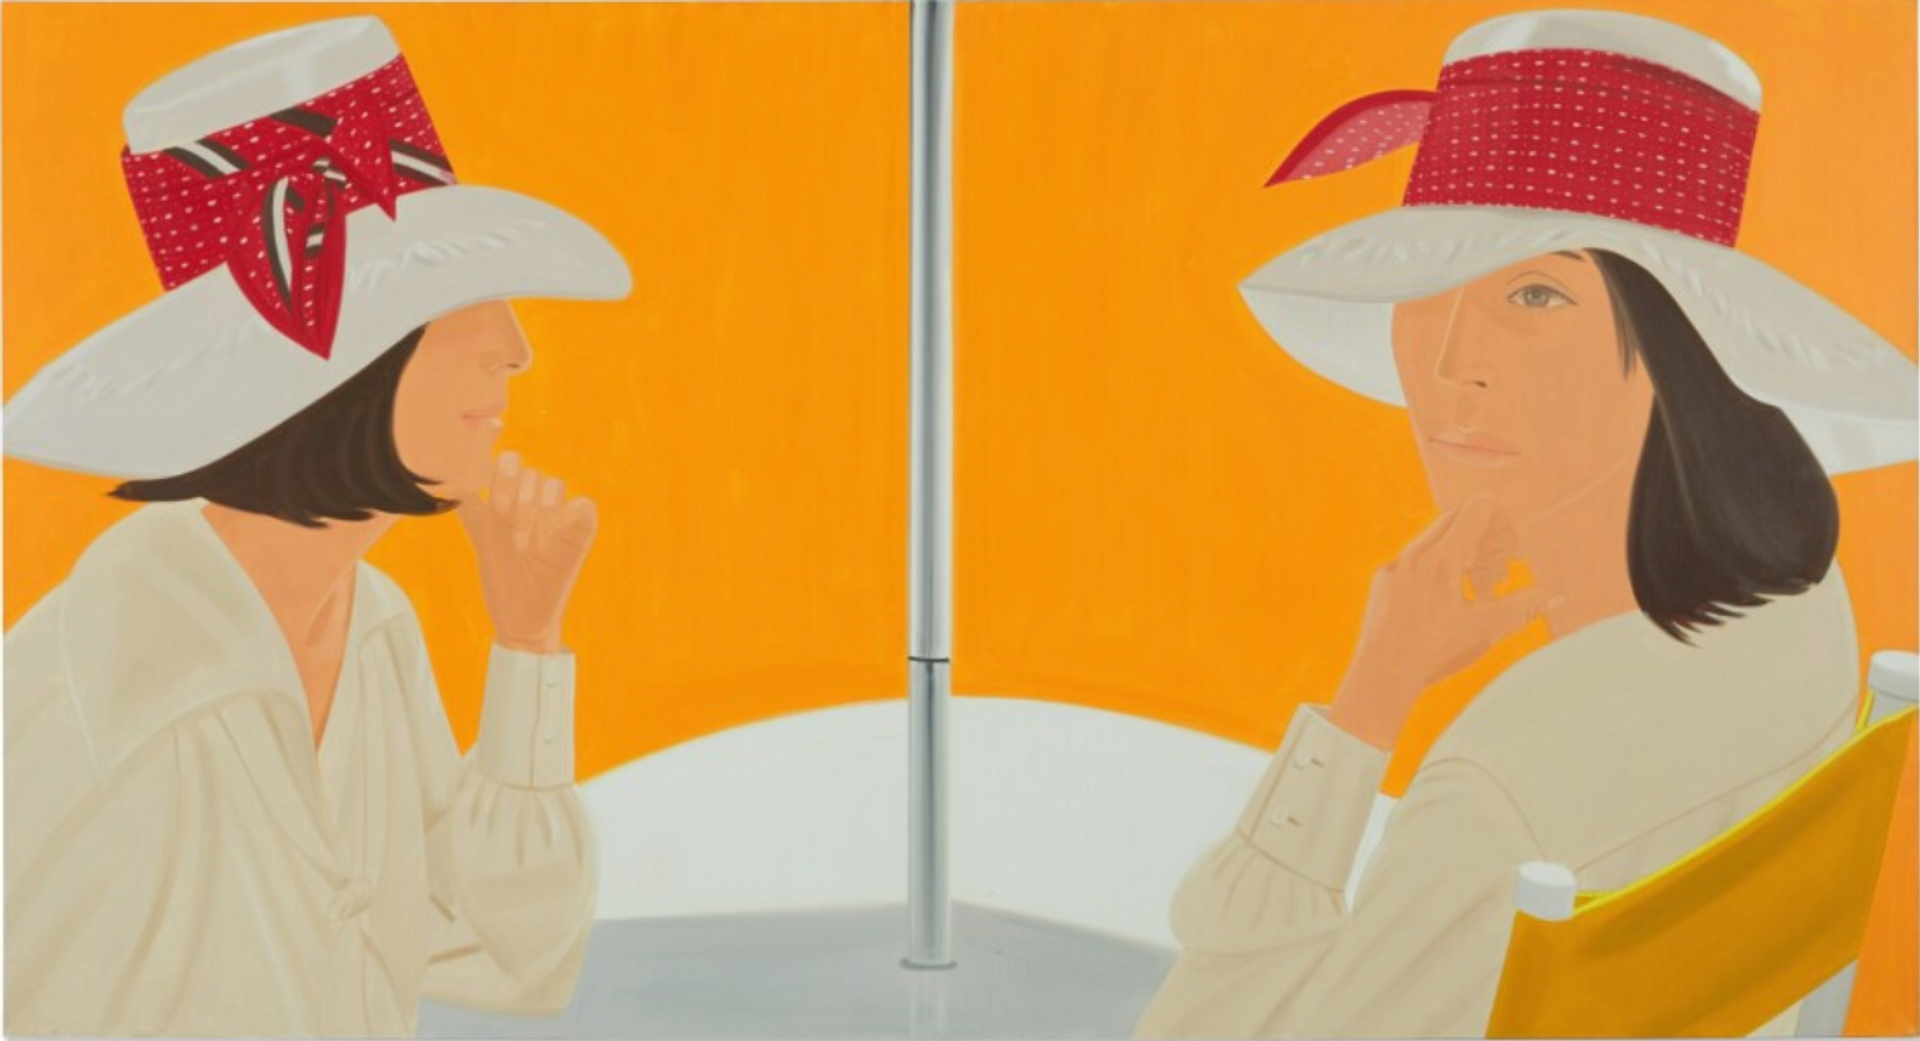 The Red Band by Alex Katz 